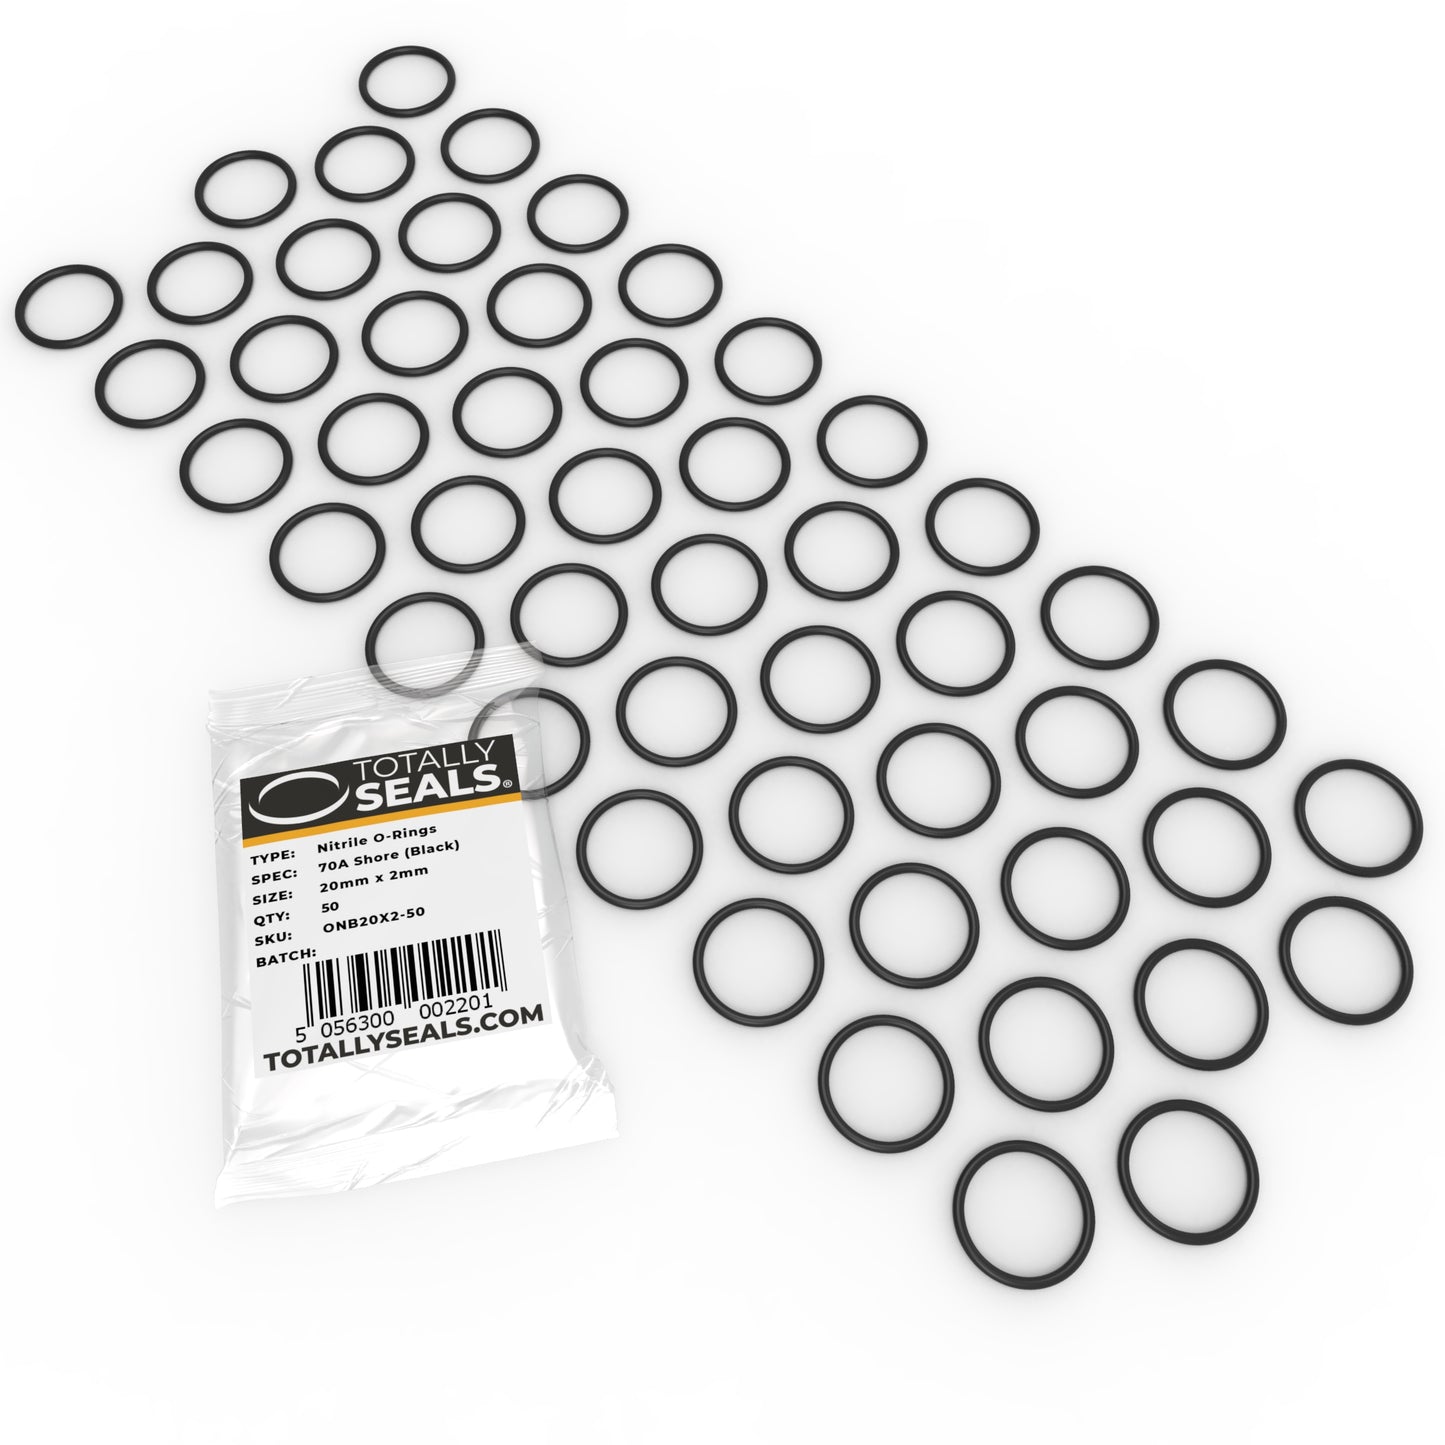 20mm x 2mm (24mm OD) Nitrile O-Rings - Totally Seals®